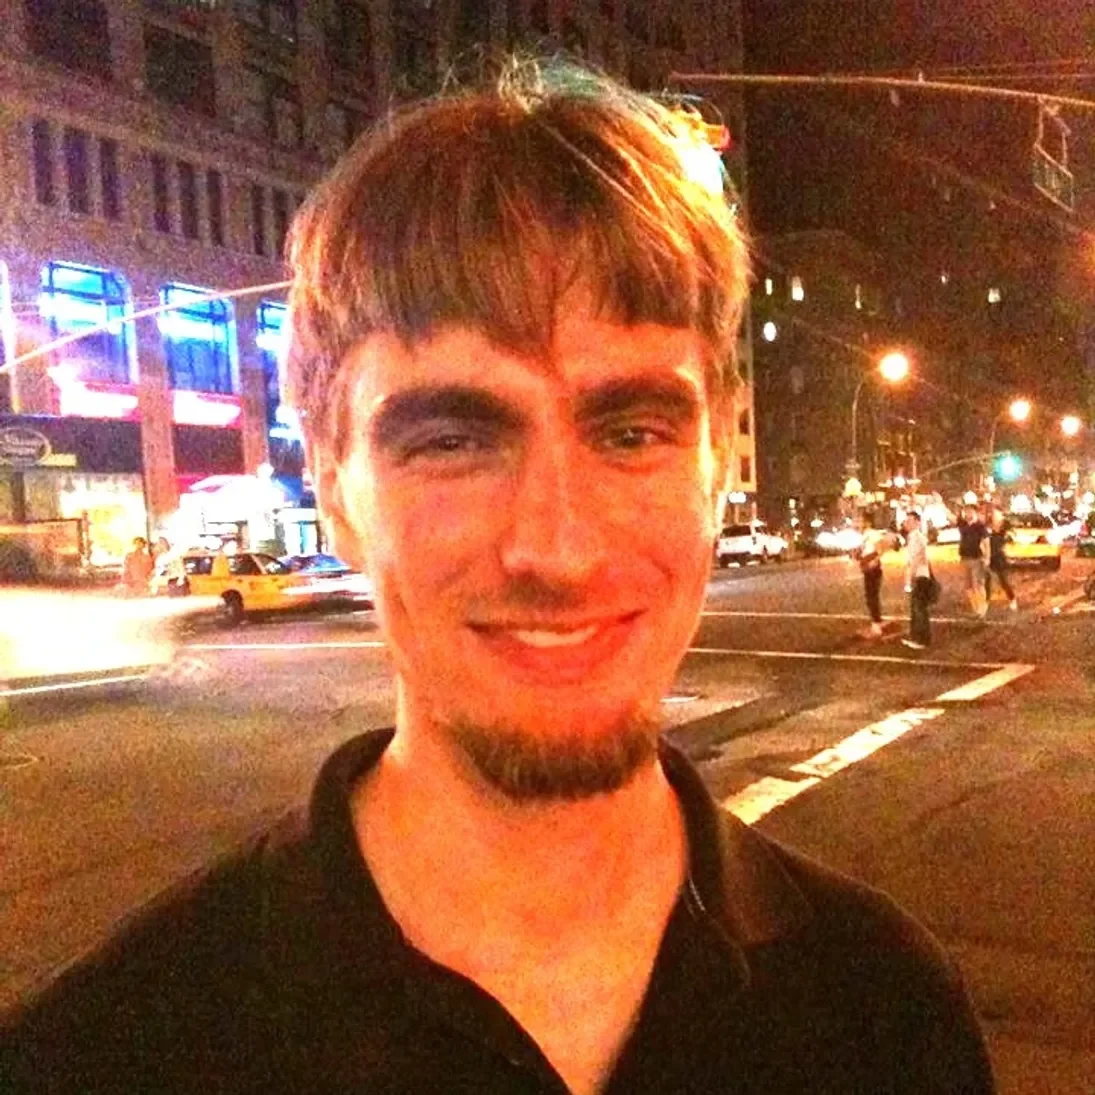 A man in a black shirt standing on a street at night.